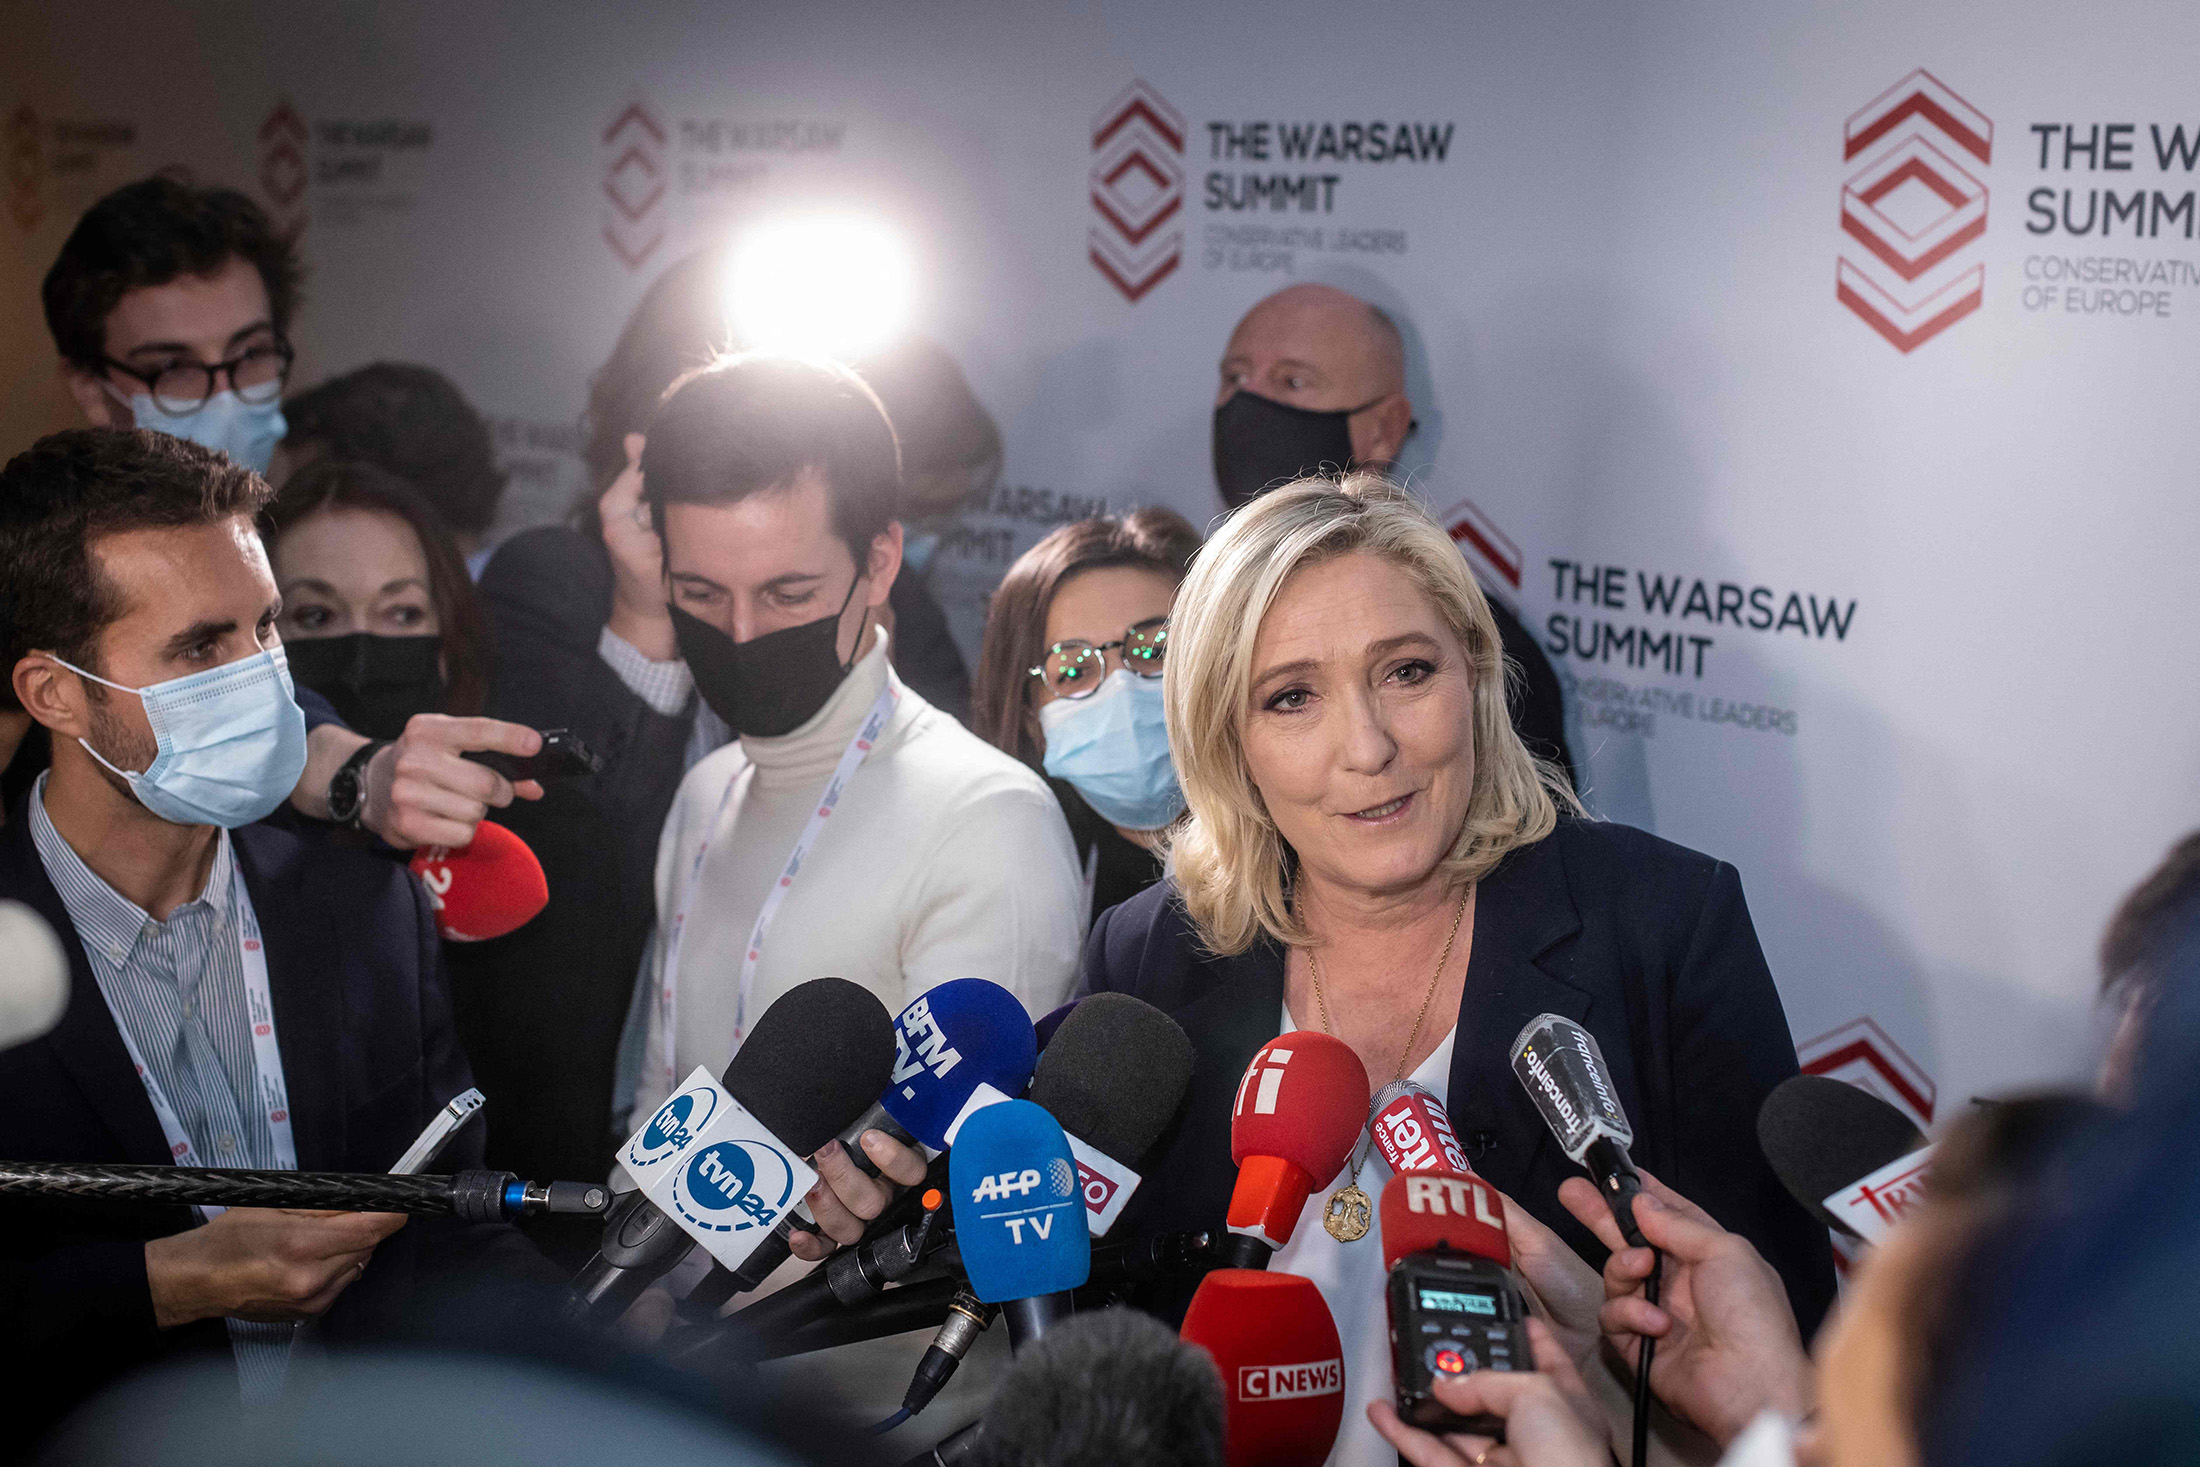 French far-right leader Marine Le Pen ordered to take psychiatric exam - Vox